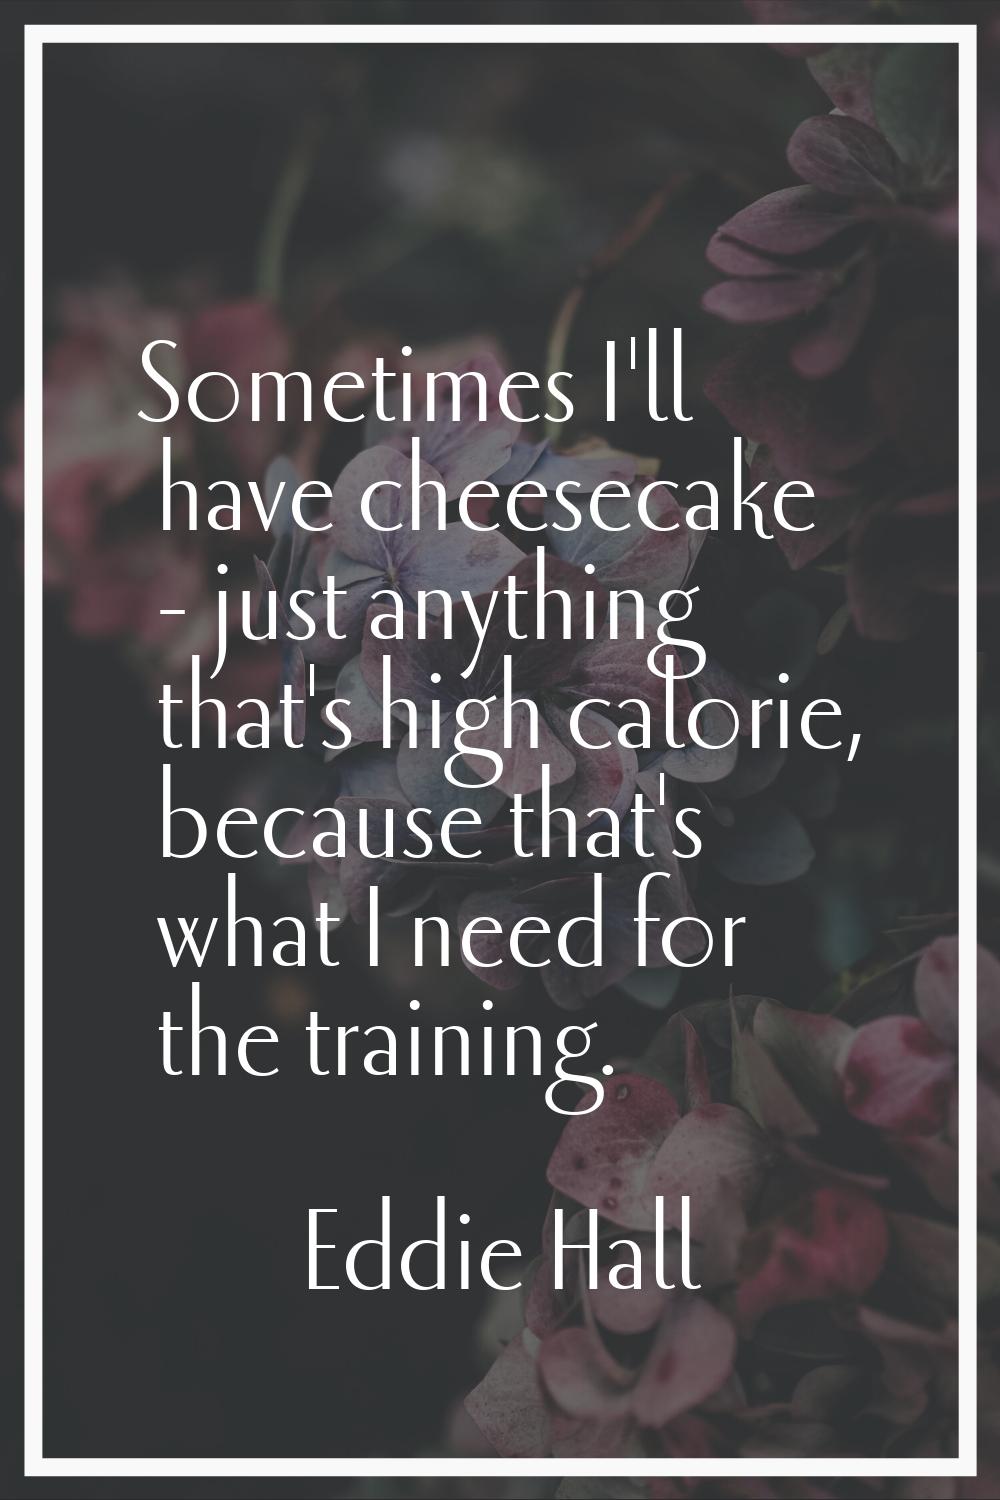 Sometimes I'll have cheesecake - just anything that's high calorie, because that's what I need for 